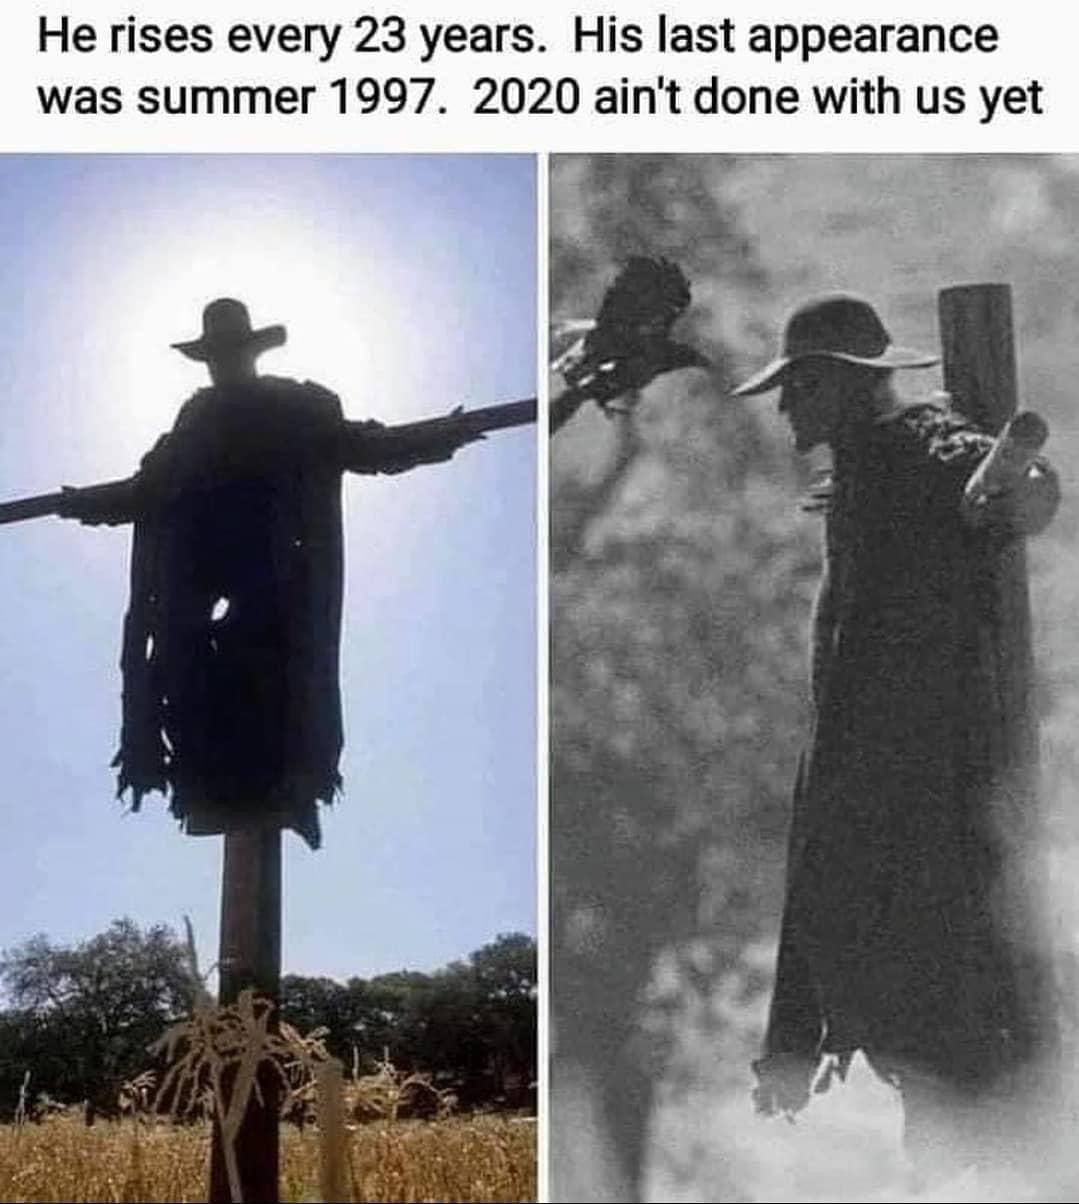 jeepers creepers meme 23 years - He rises every 23 years. His last appearance was summer 1997. 2020 ain't done with us yet